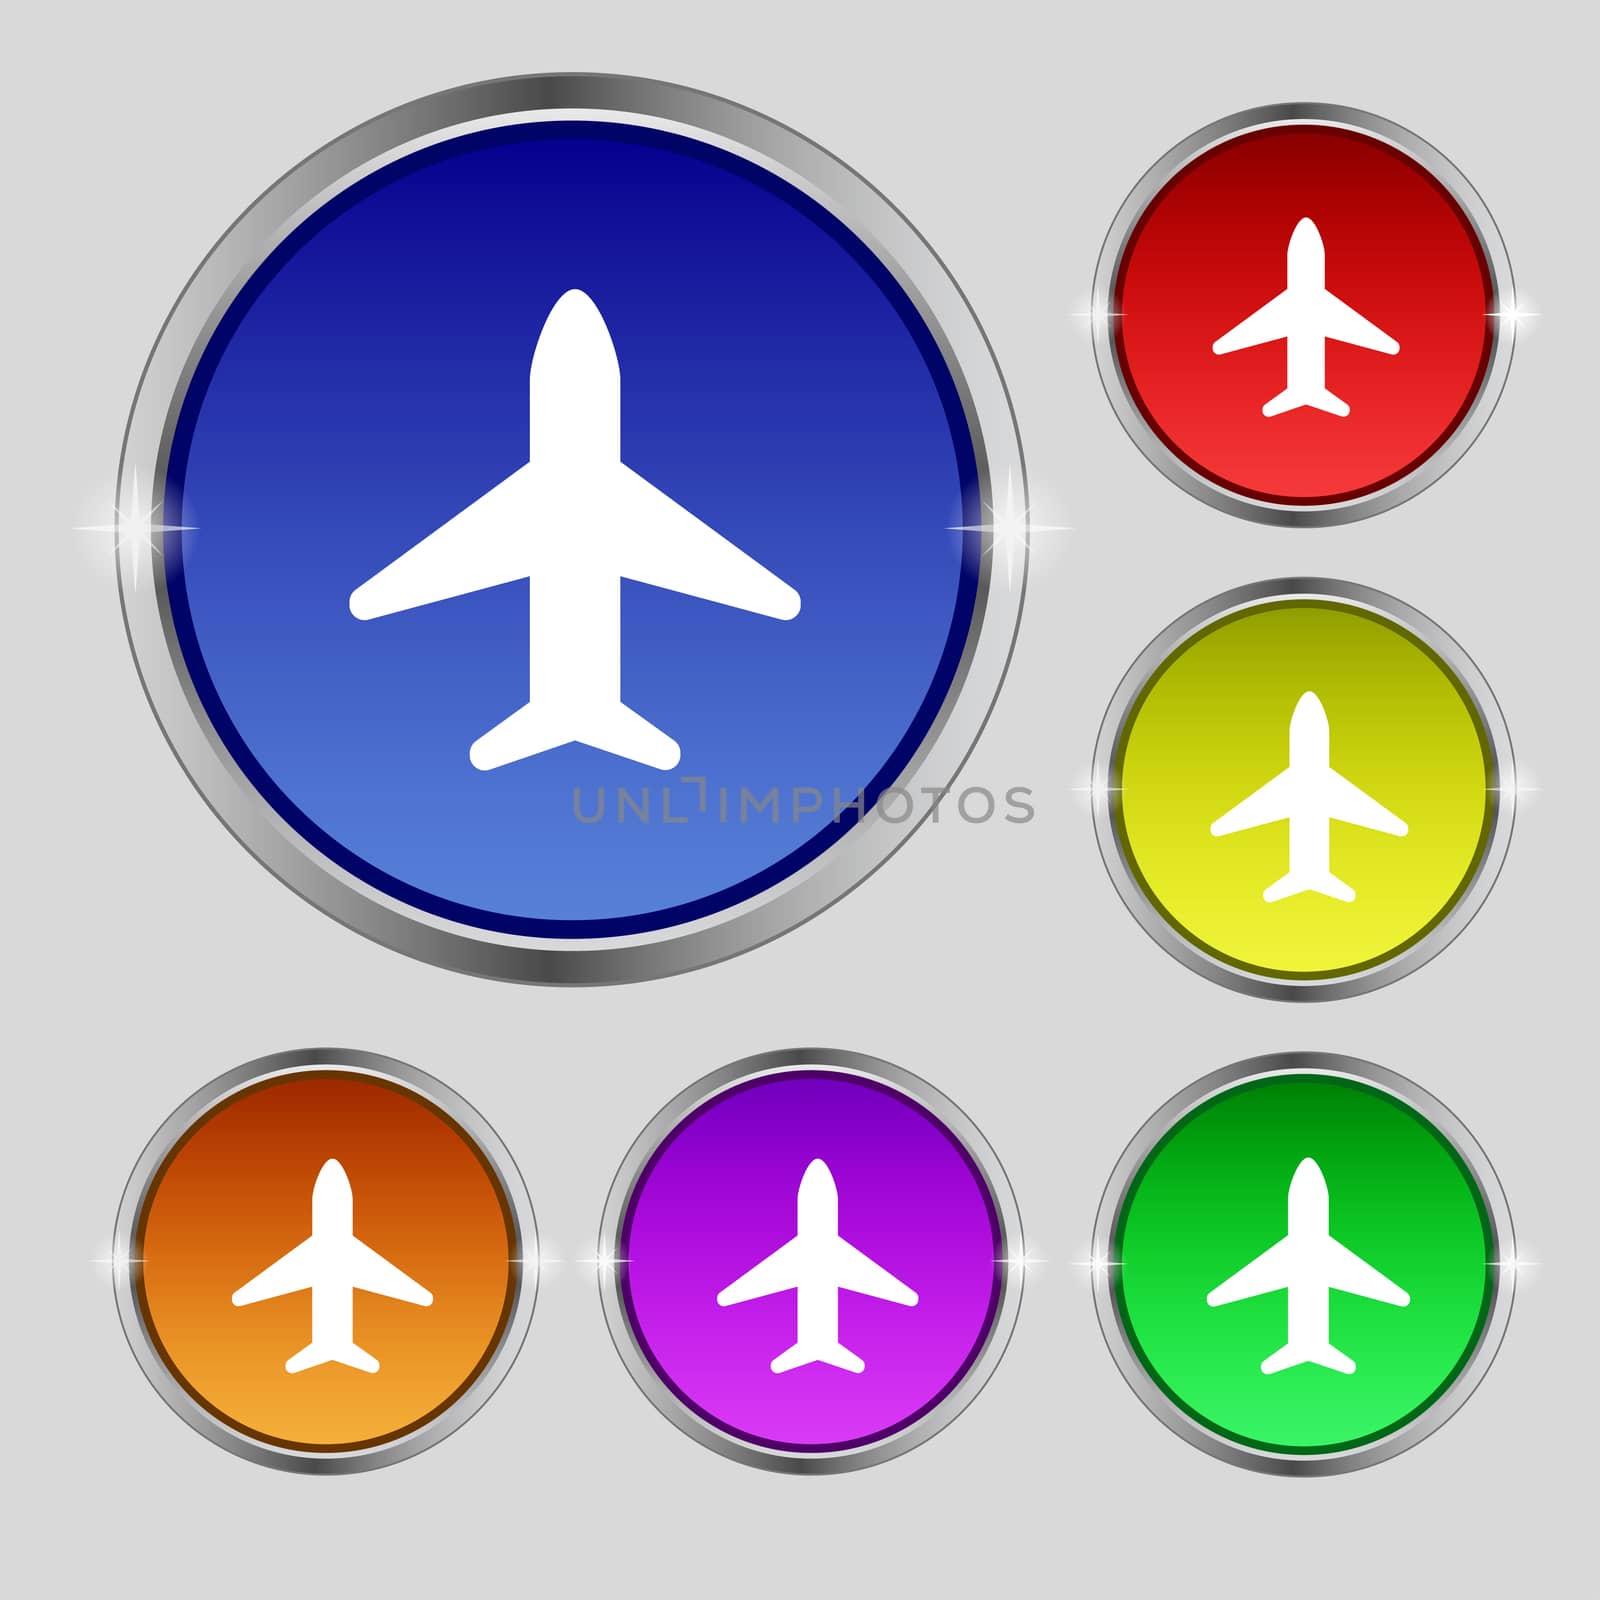 Airplane, Plane, Travel, Flight icon sign. Round symbol on bright colourful buttons.  by serhii_lohvyniuk